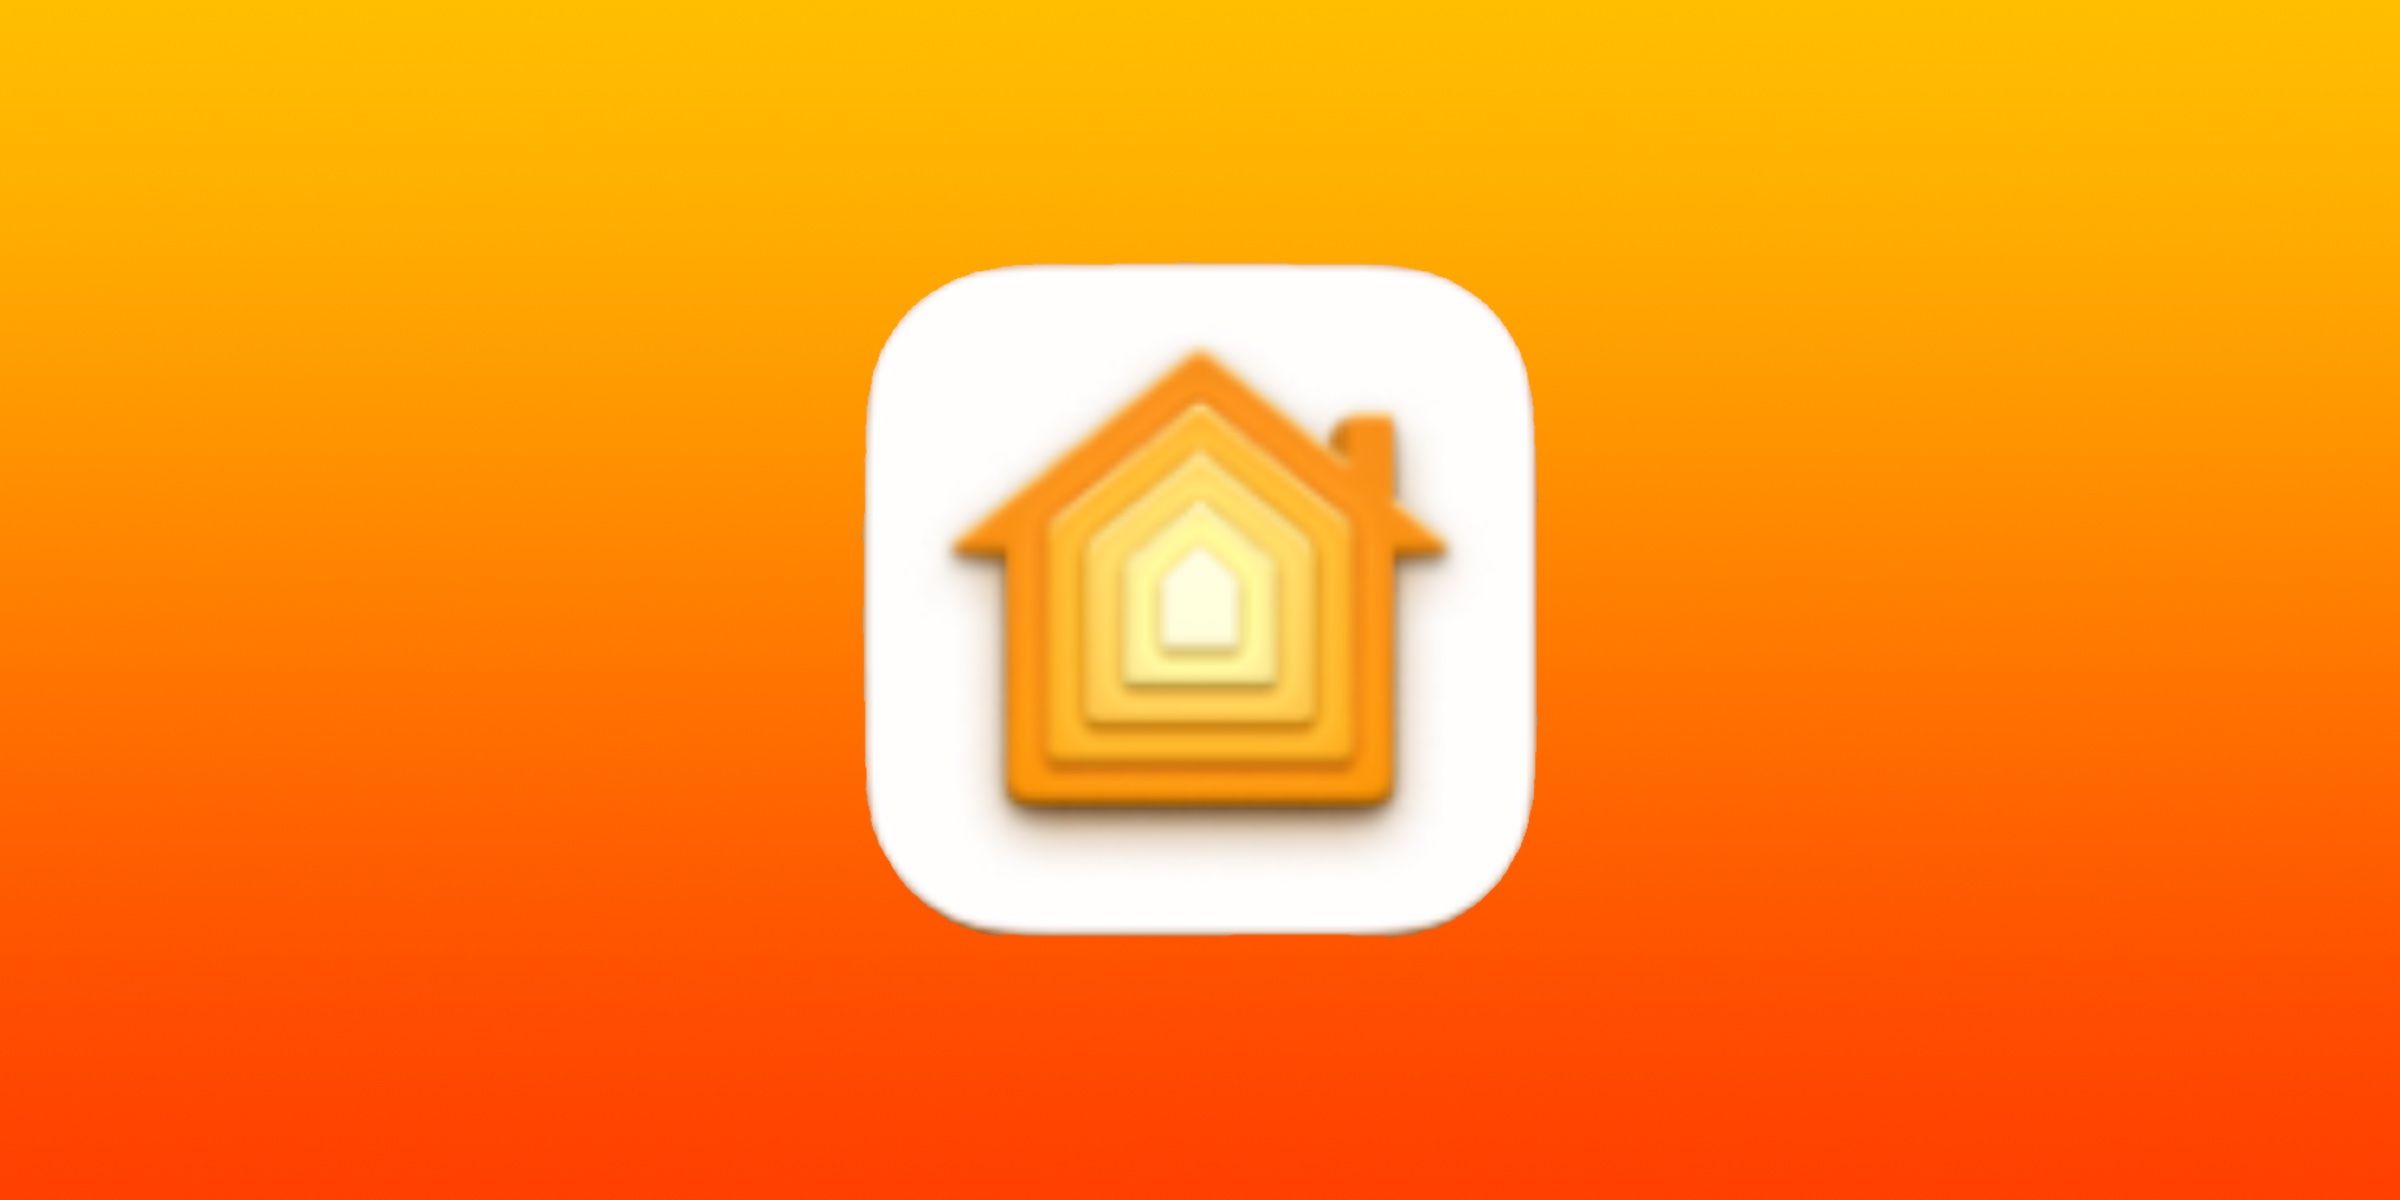 Apple's Home App icon against an orange and yellow gradient background.